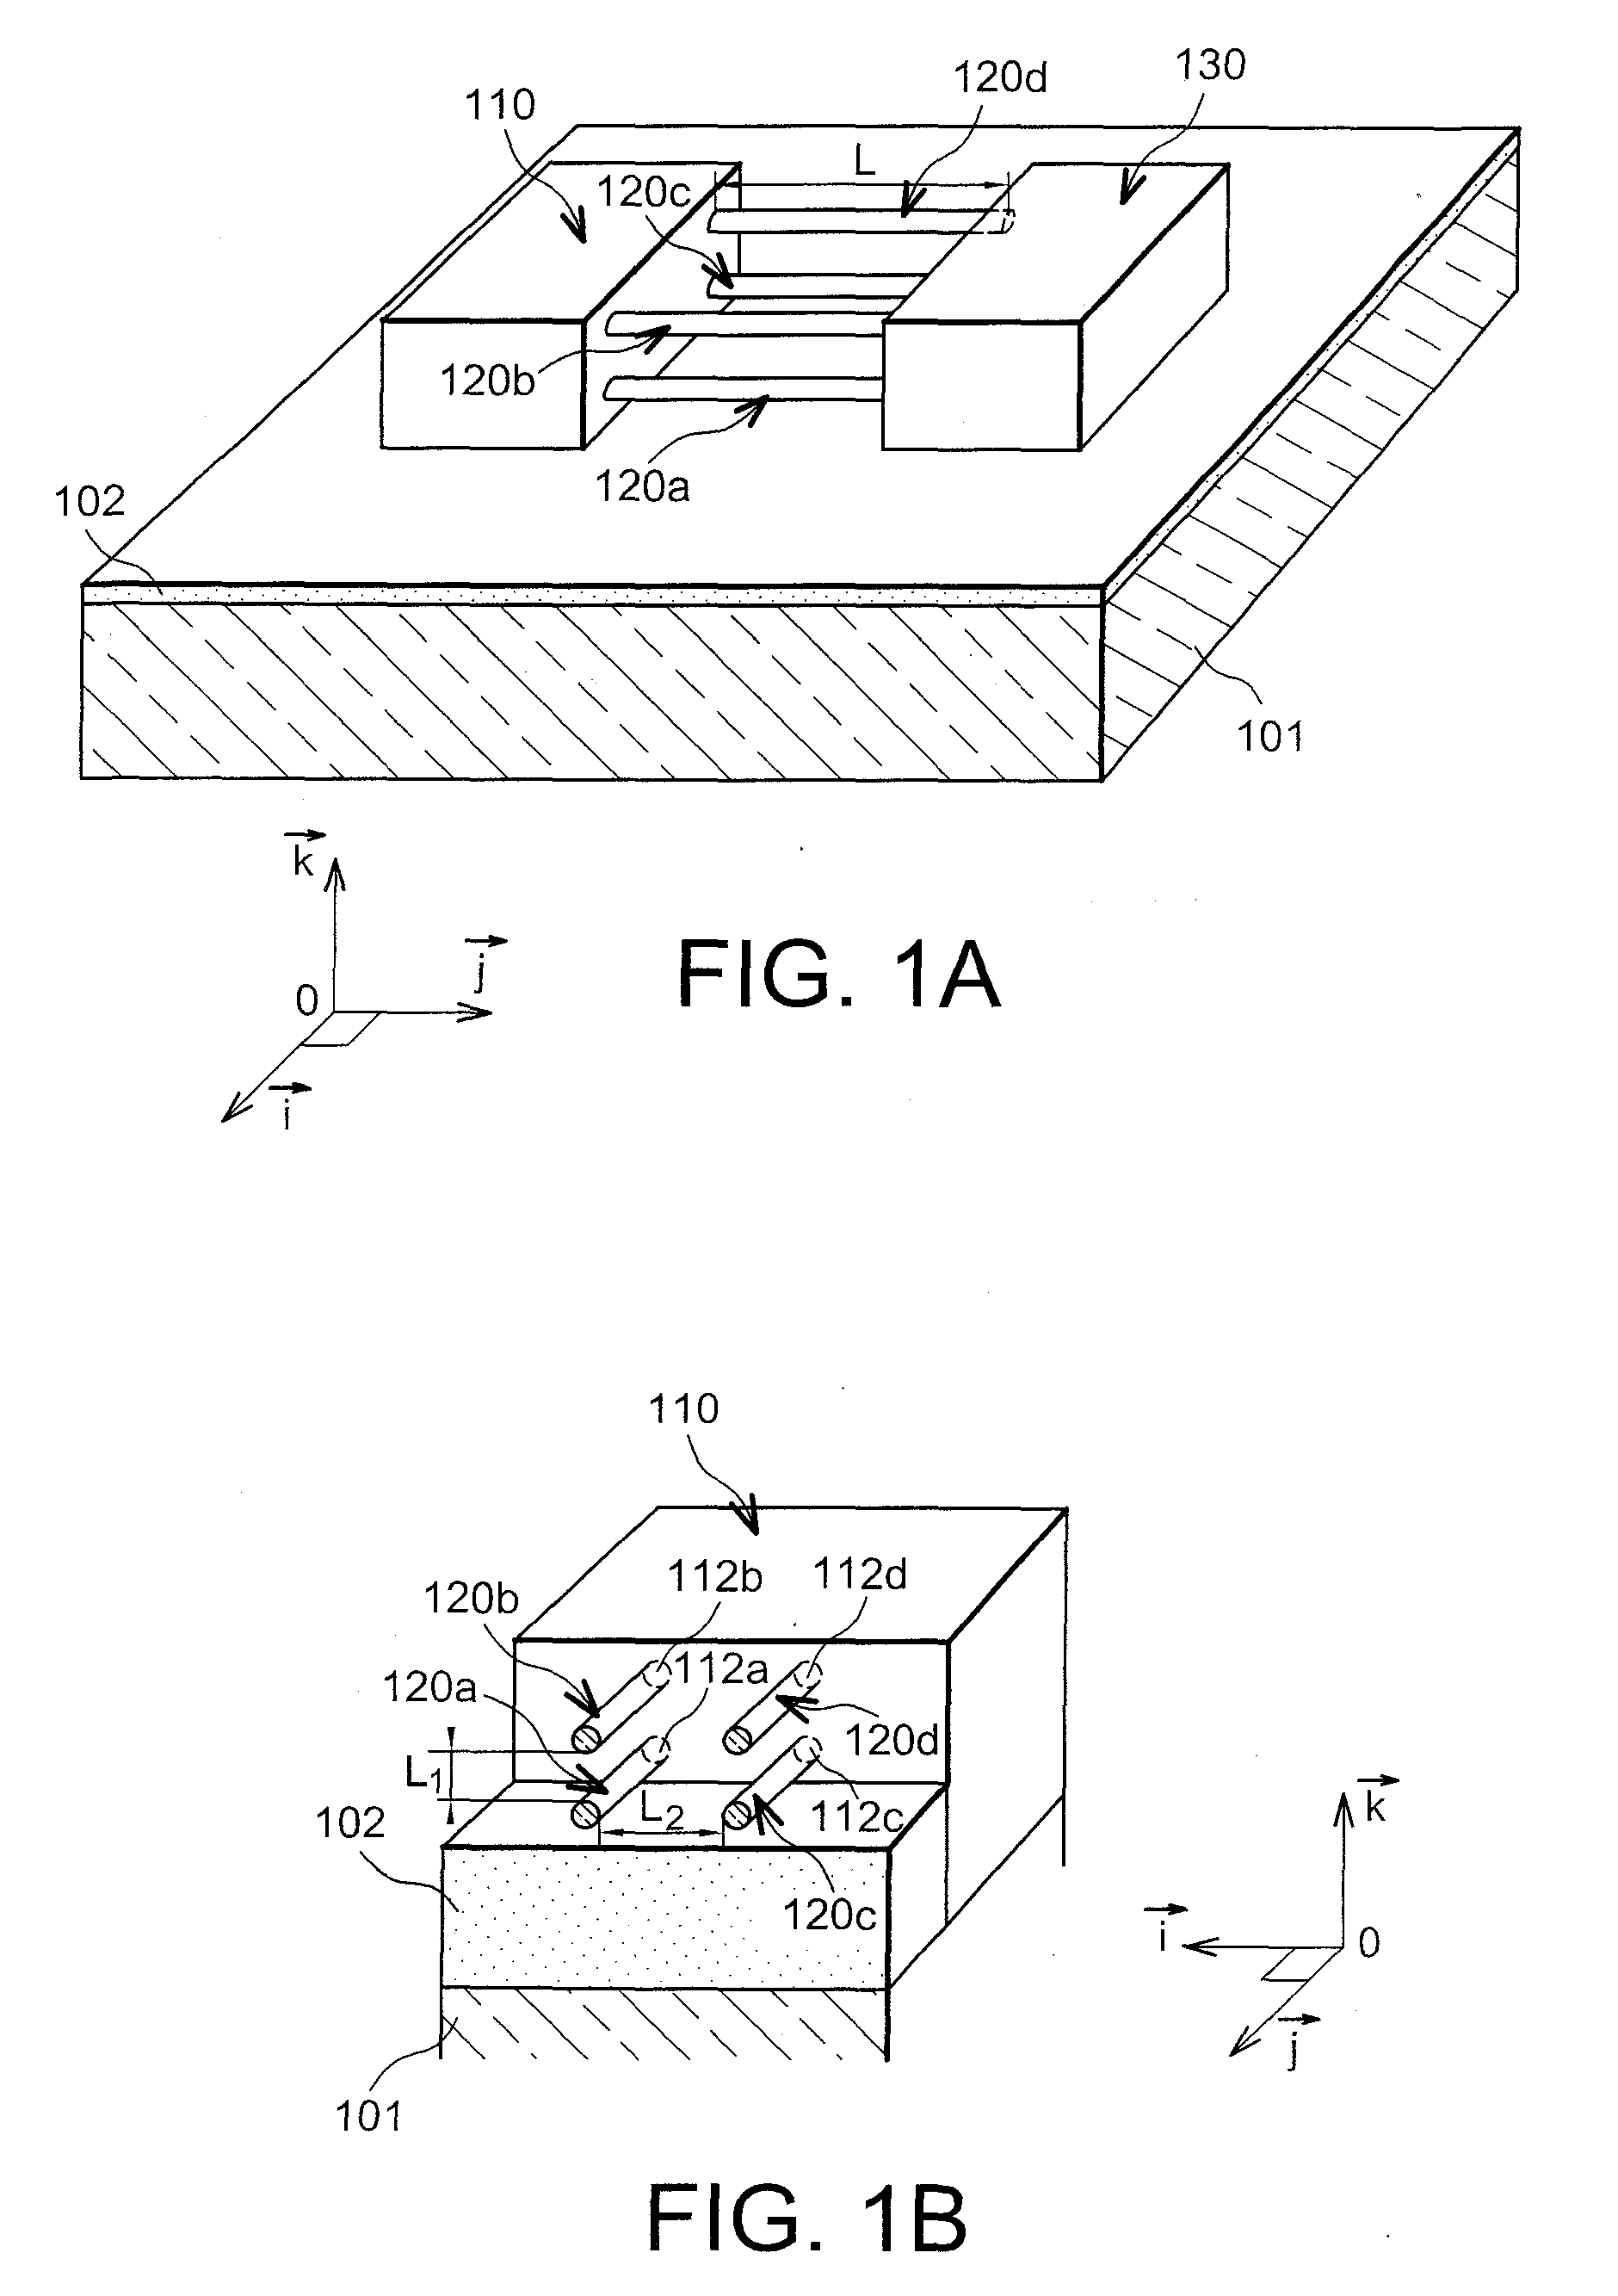 Structure and Method For Realizing a Microelectronic Device Provided With a Number of Quantum Wires Capable of Forming One or More Transistor Channels